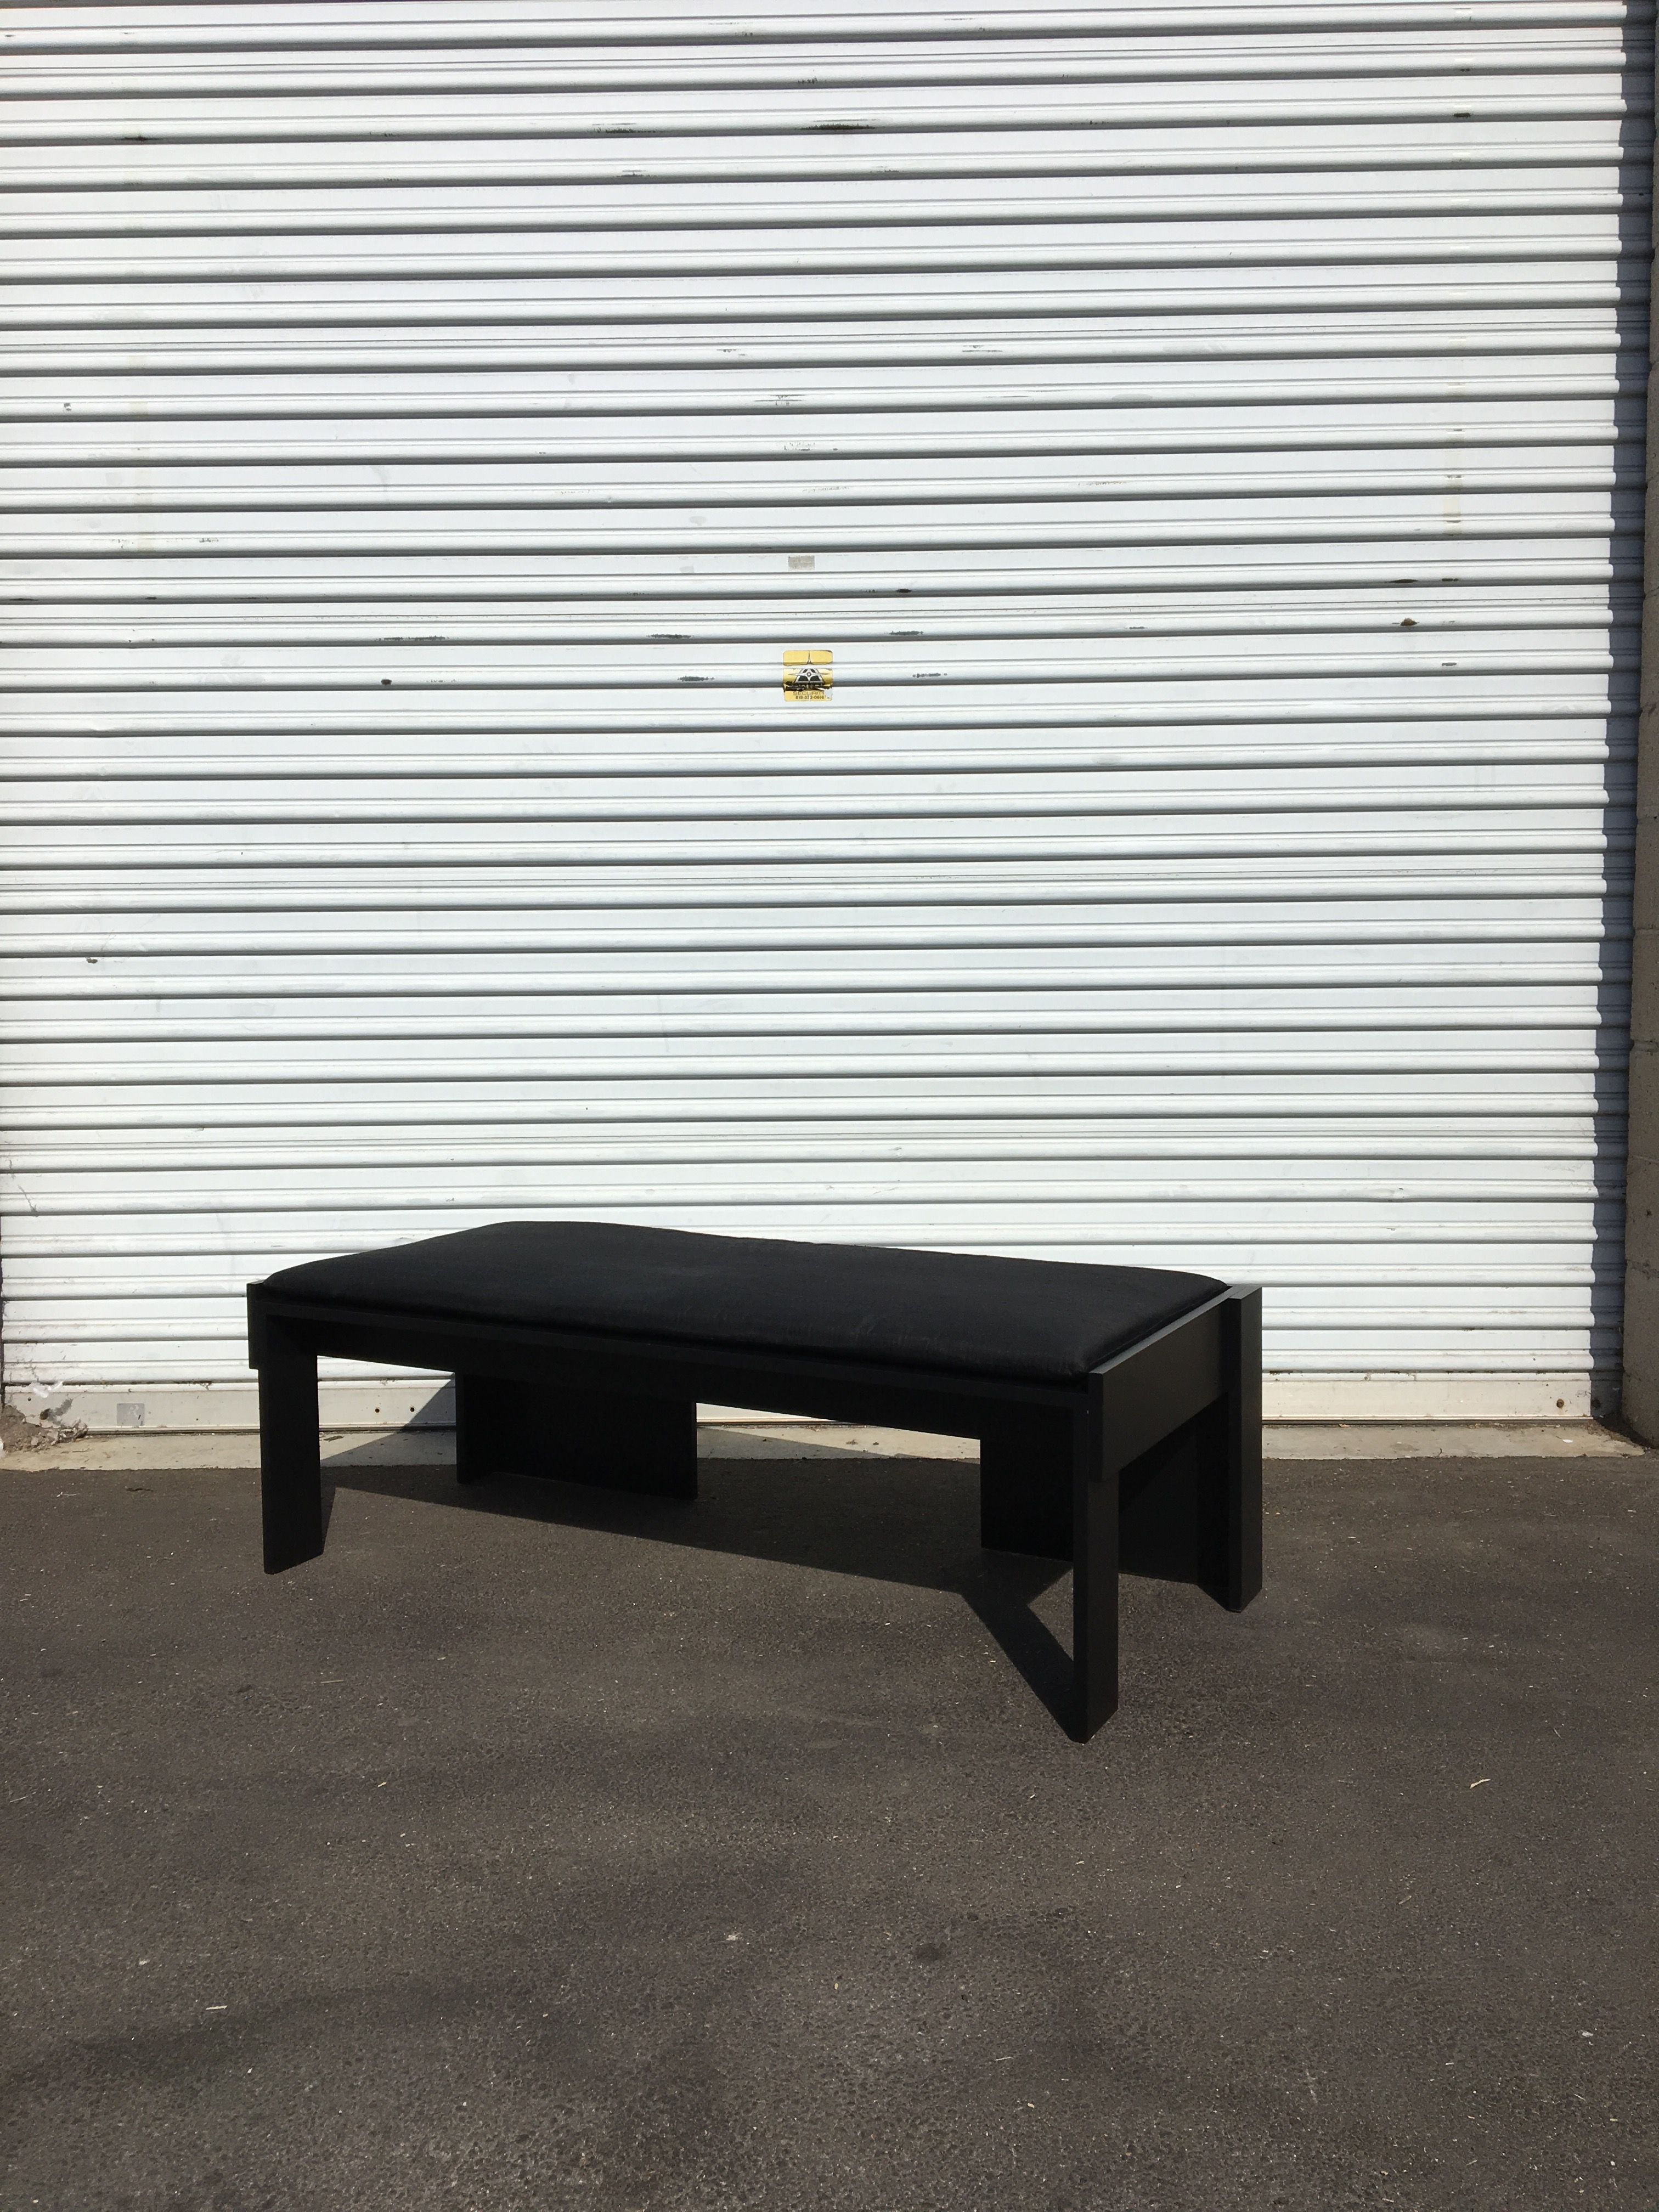  Black Rectangle Bench product image 1